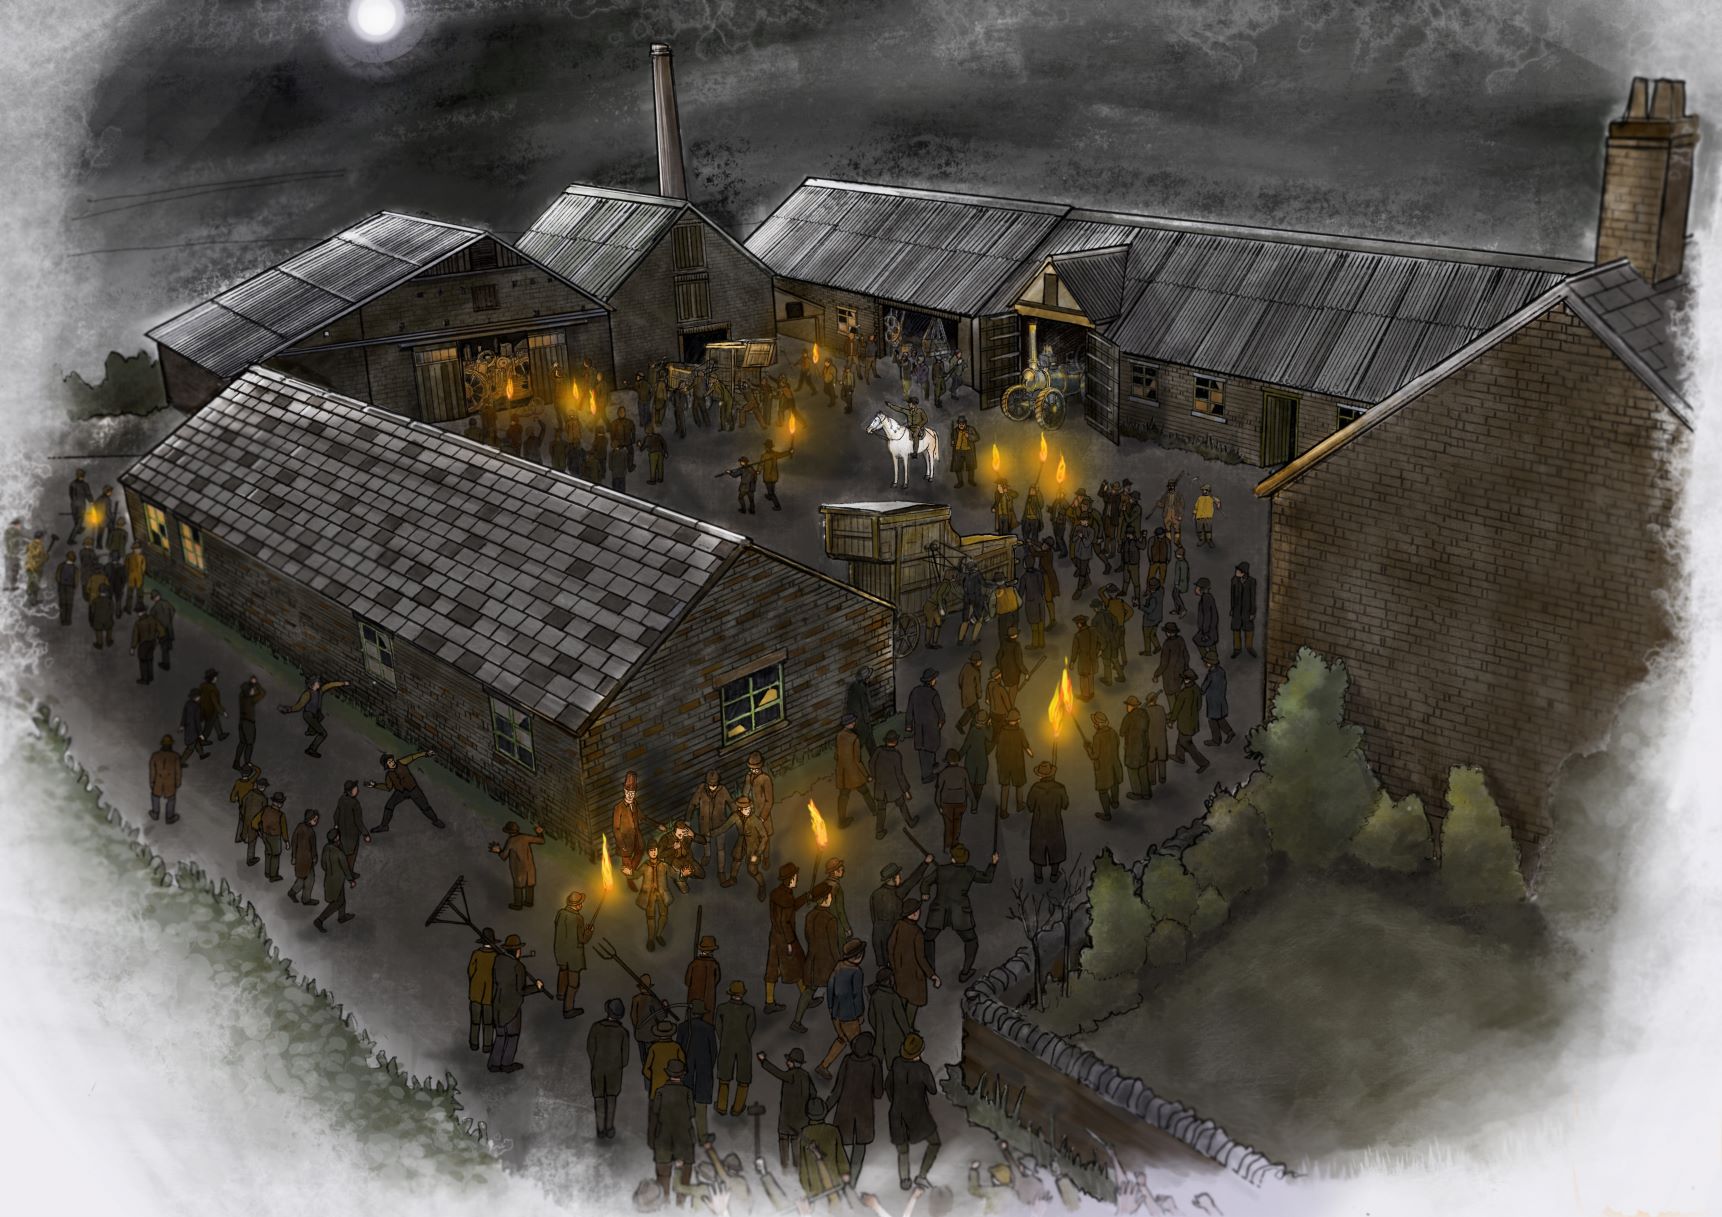 Drawing of people carrying torches and gathered around a courtyard of buildings at night.